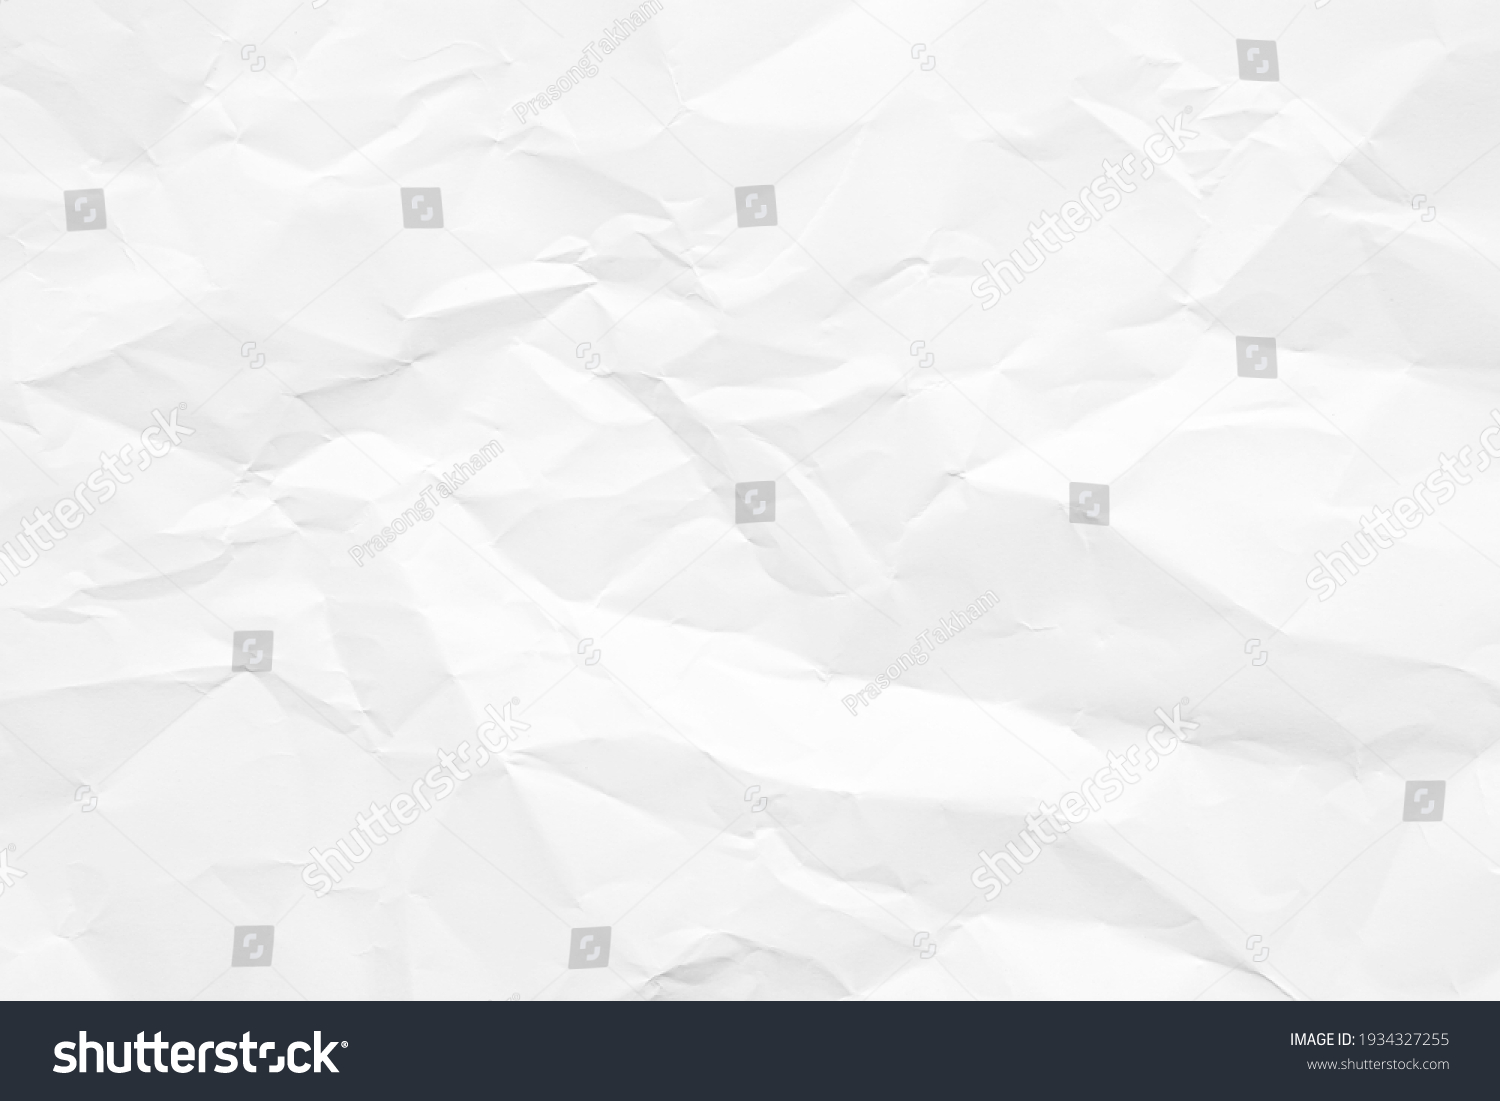 Clean white paper, wrinkled, abstract background. #1934327255